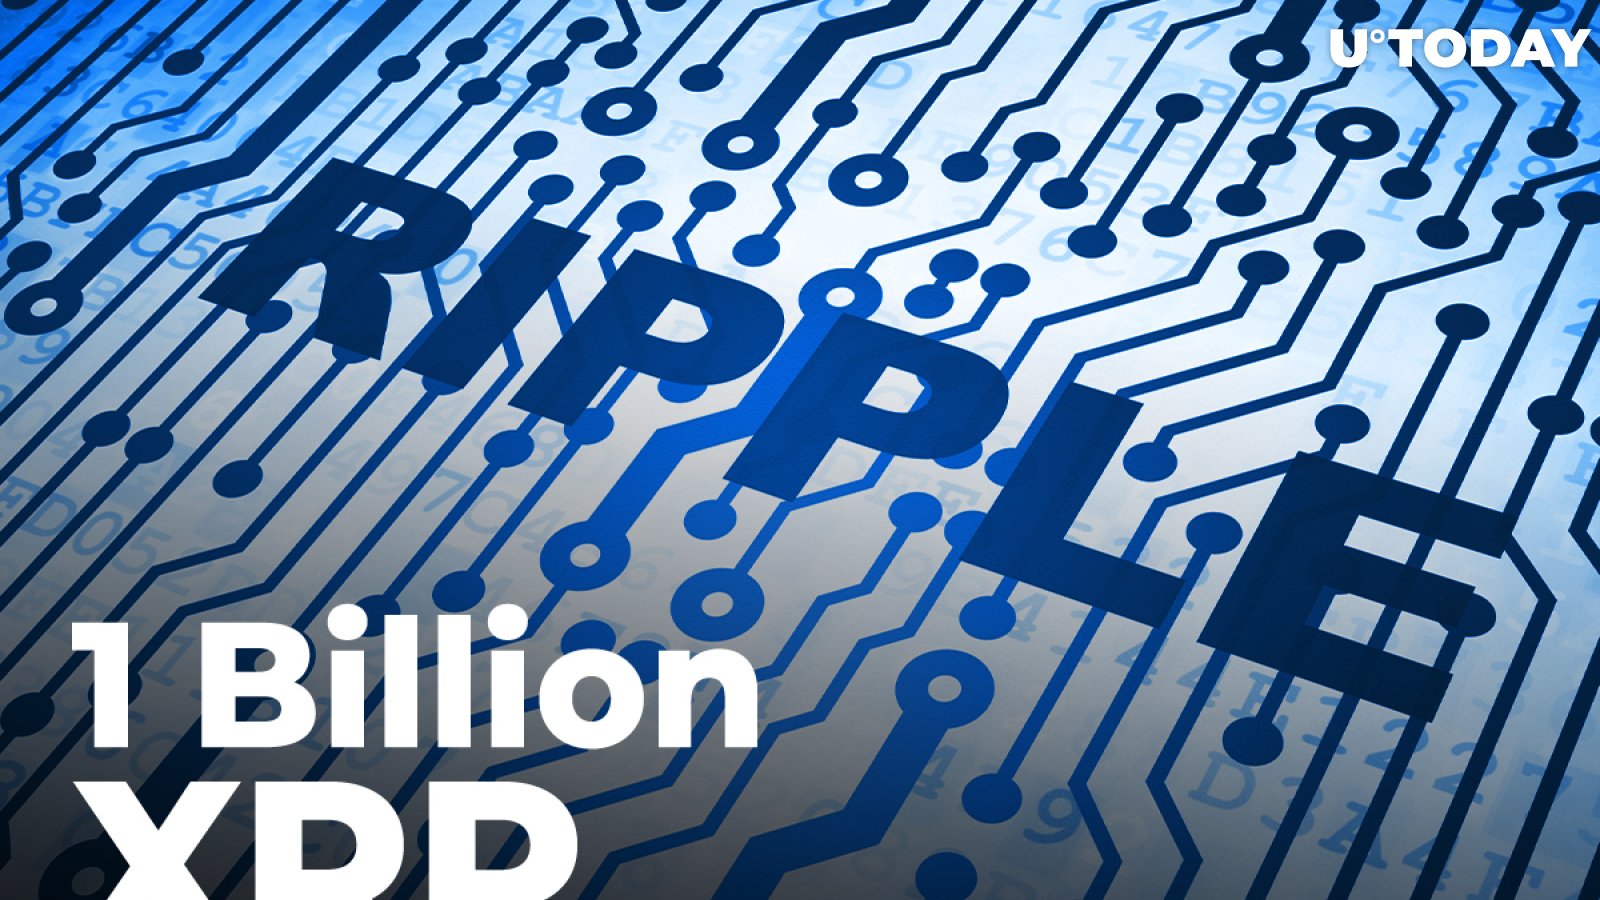 Ripple Withdraws 1 Billion XRP from Escrow, Then Helps Shift 114.2 Million XRP